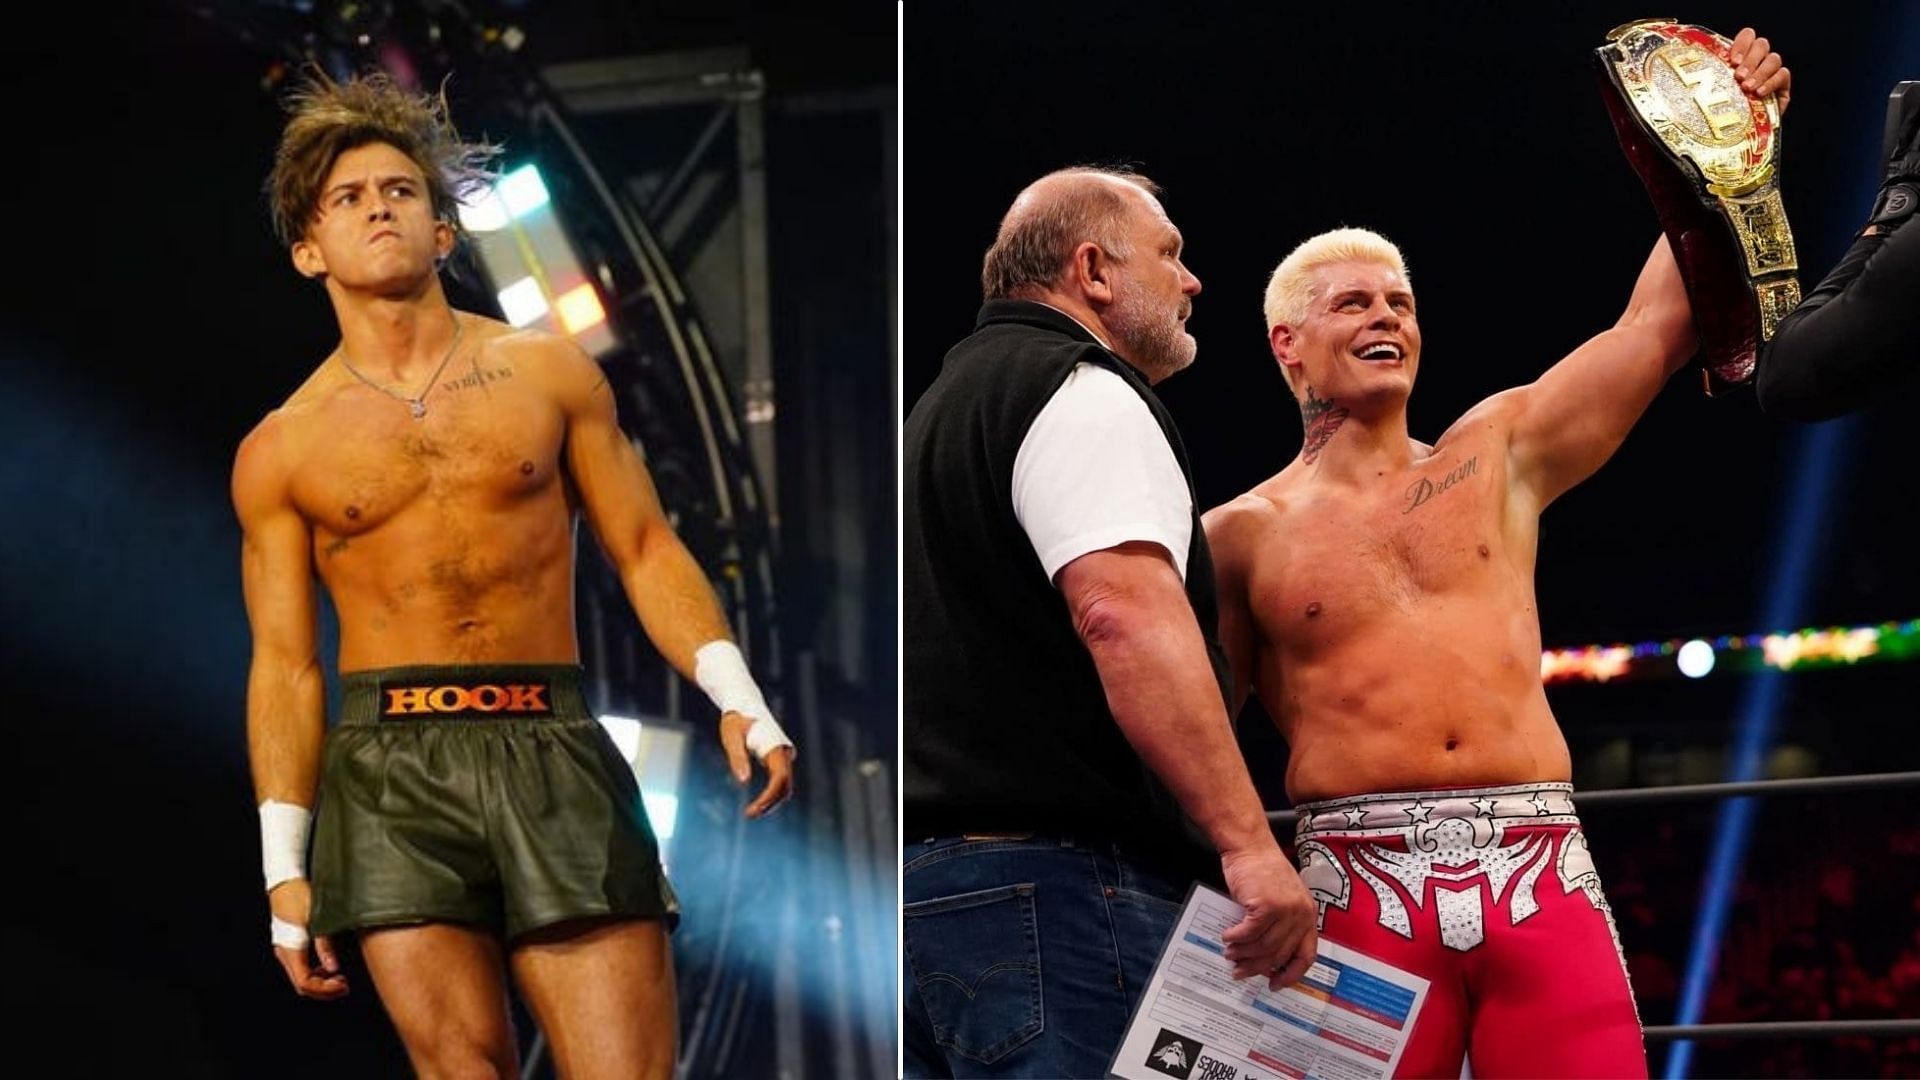 From HOOK (left) to Cody (right), AEW has invested in wrestling bloodlines